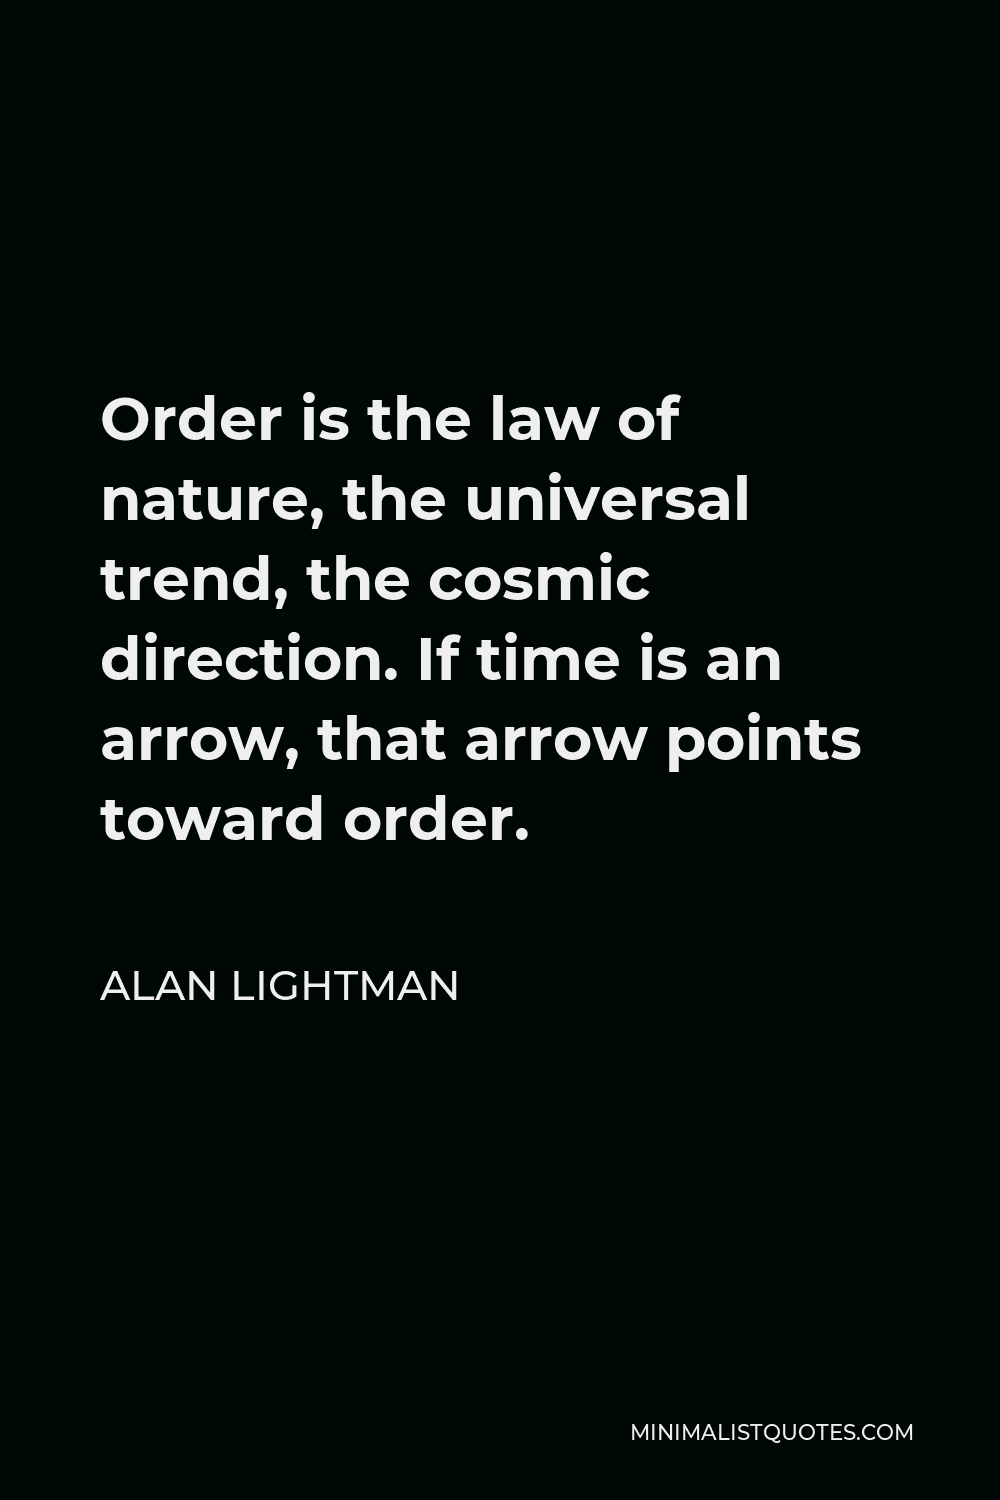 Alan Lightman Quote - Order is the law of nature, the universal trend, the cosmic direction. If time is an arrow, that arrow points toward order.